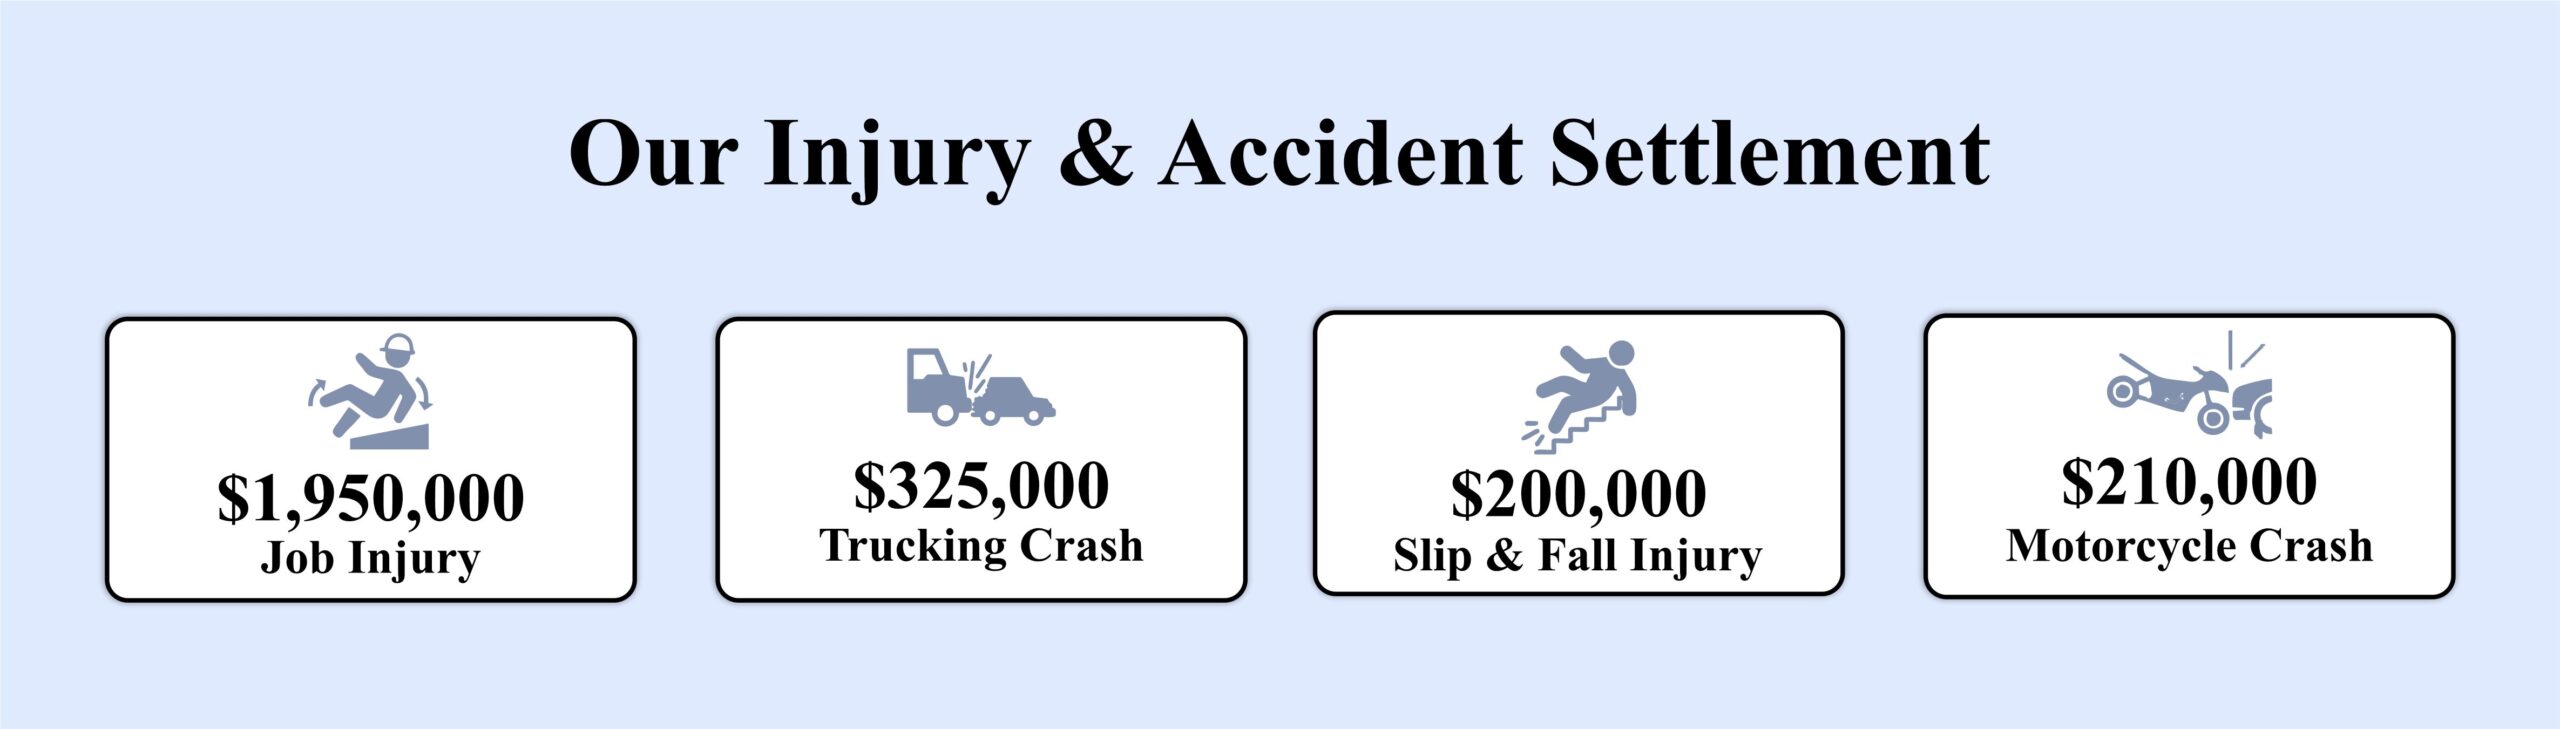 Our Injury & Accident Settlement